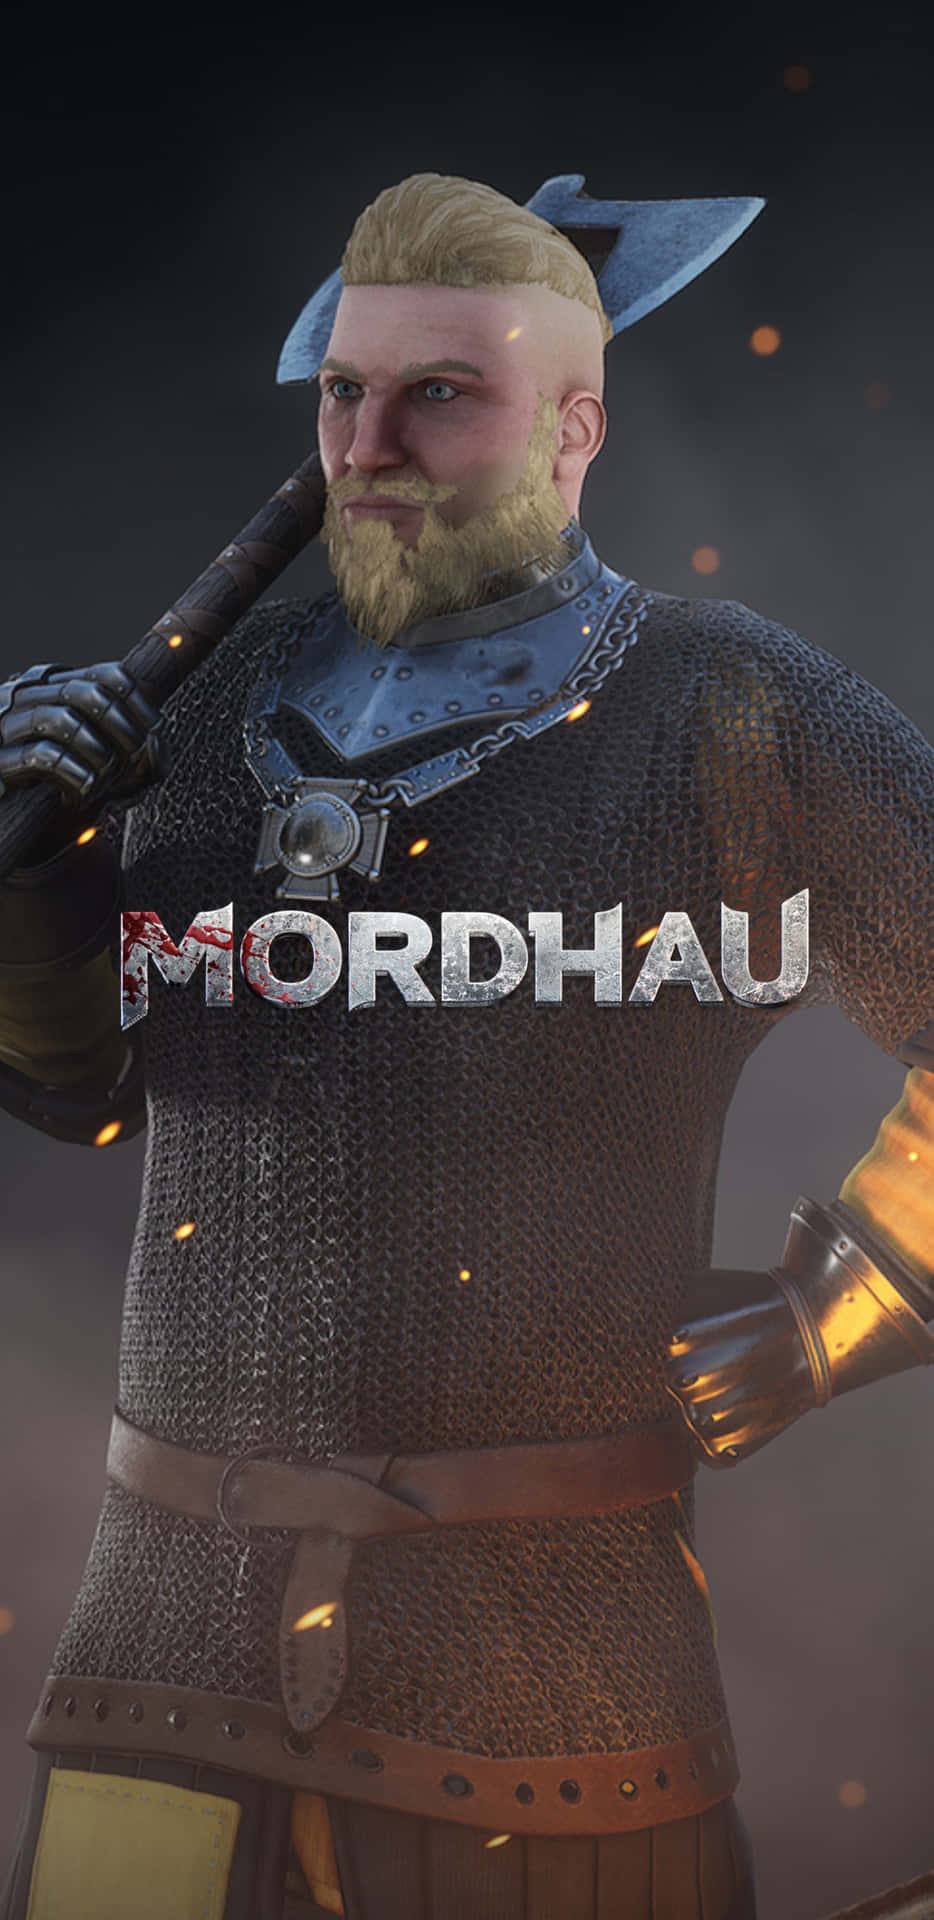 "Welcome to the battlefields with the Pixel 3XL in Mordhau"